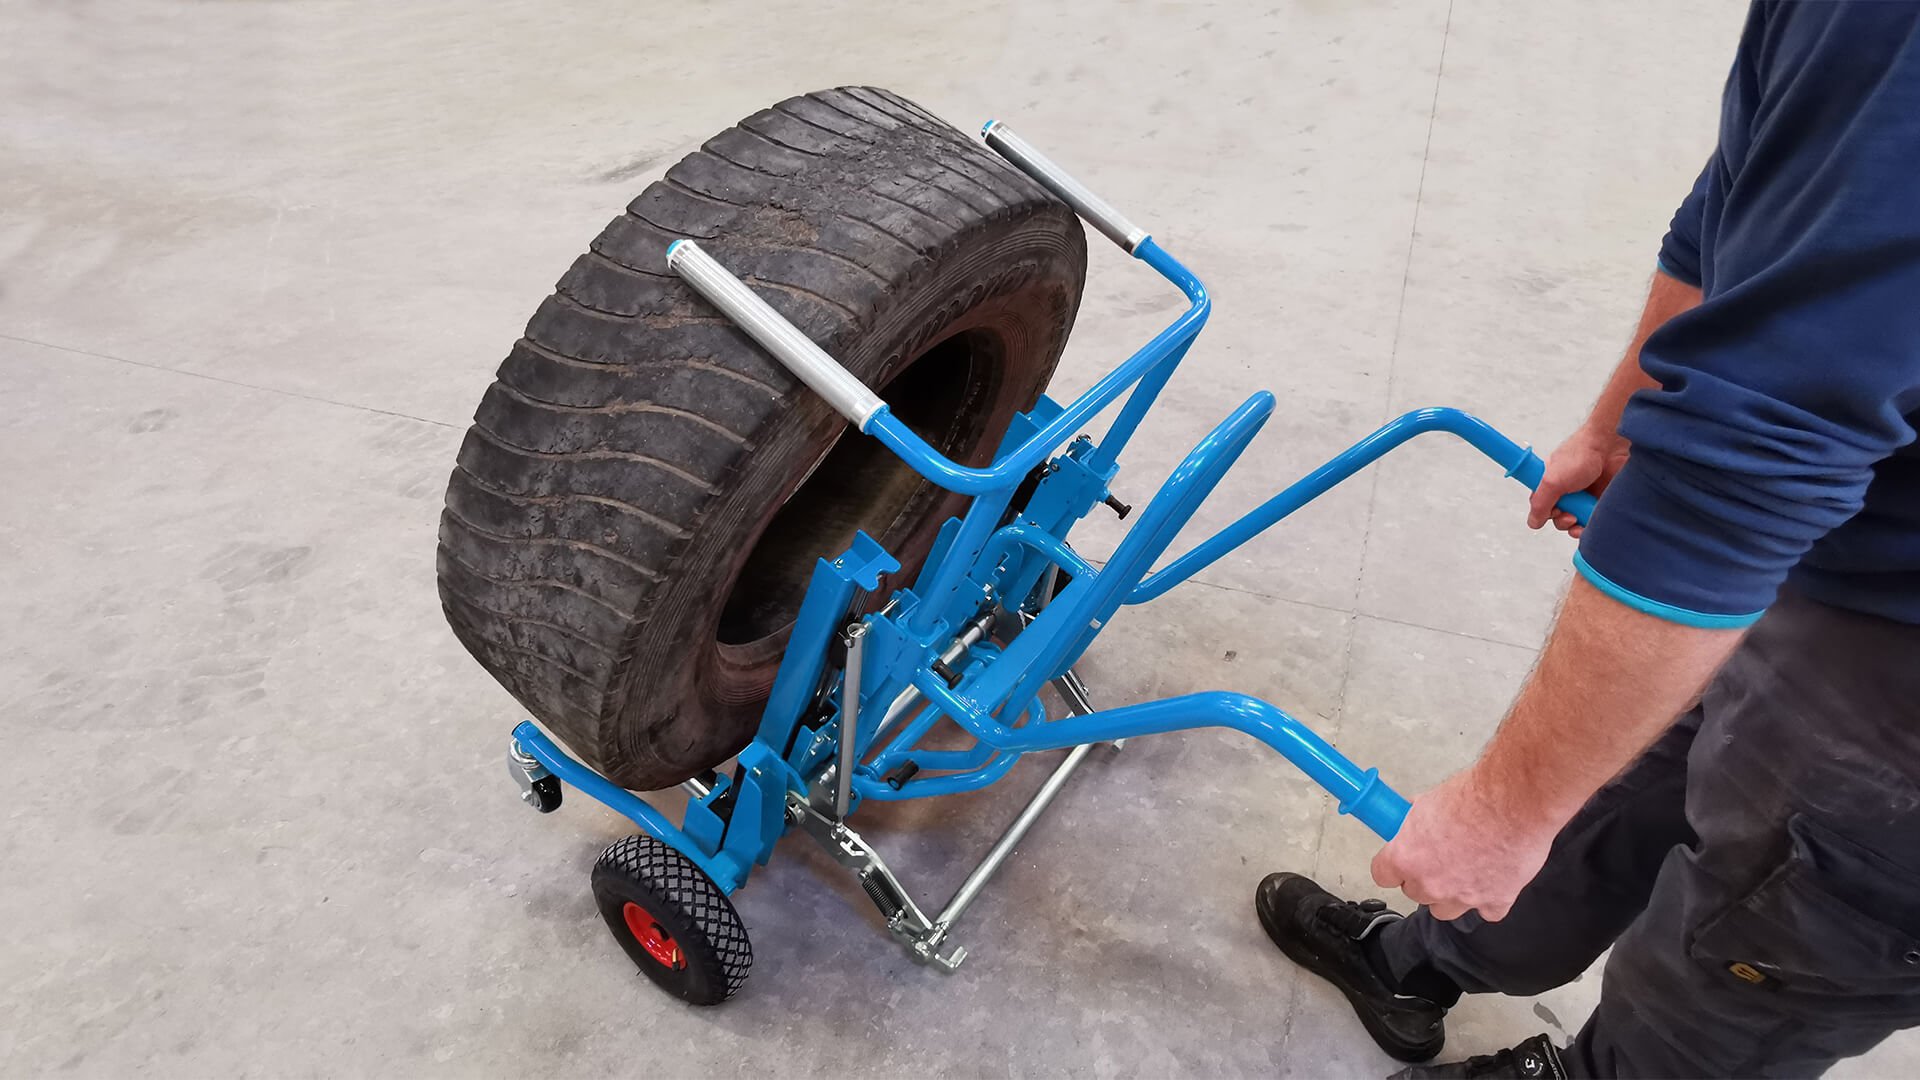 Easy to tilt the wheel forward and backward for precise positioning below fenders